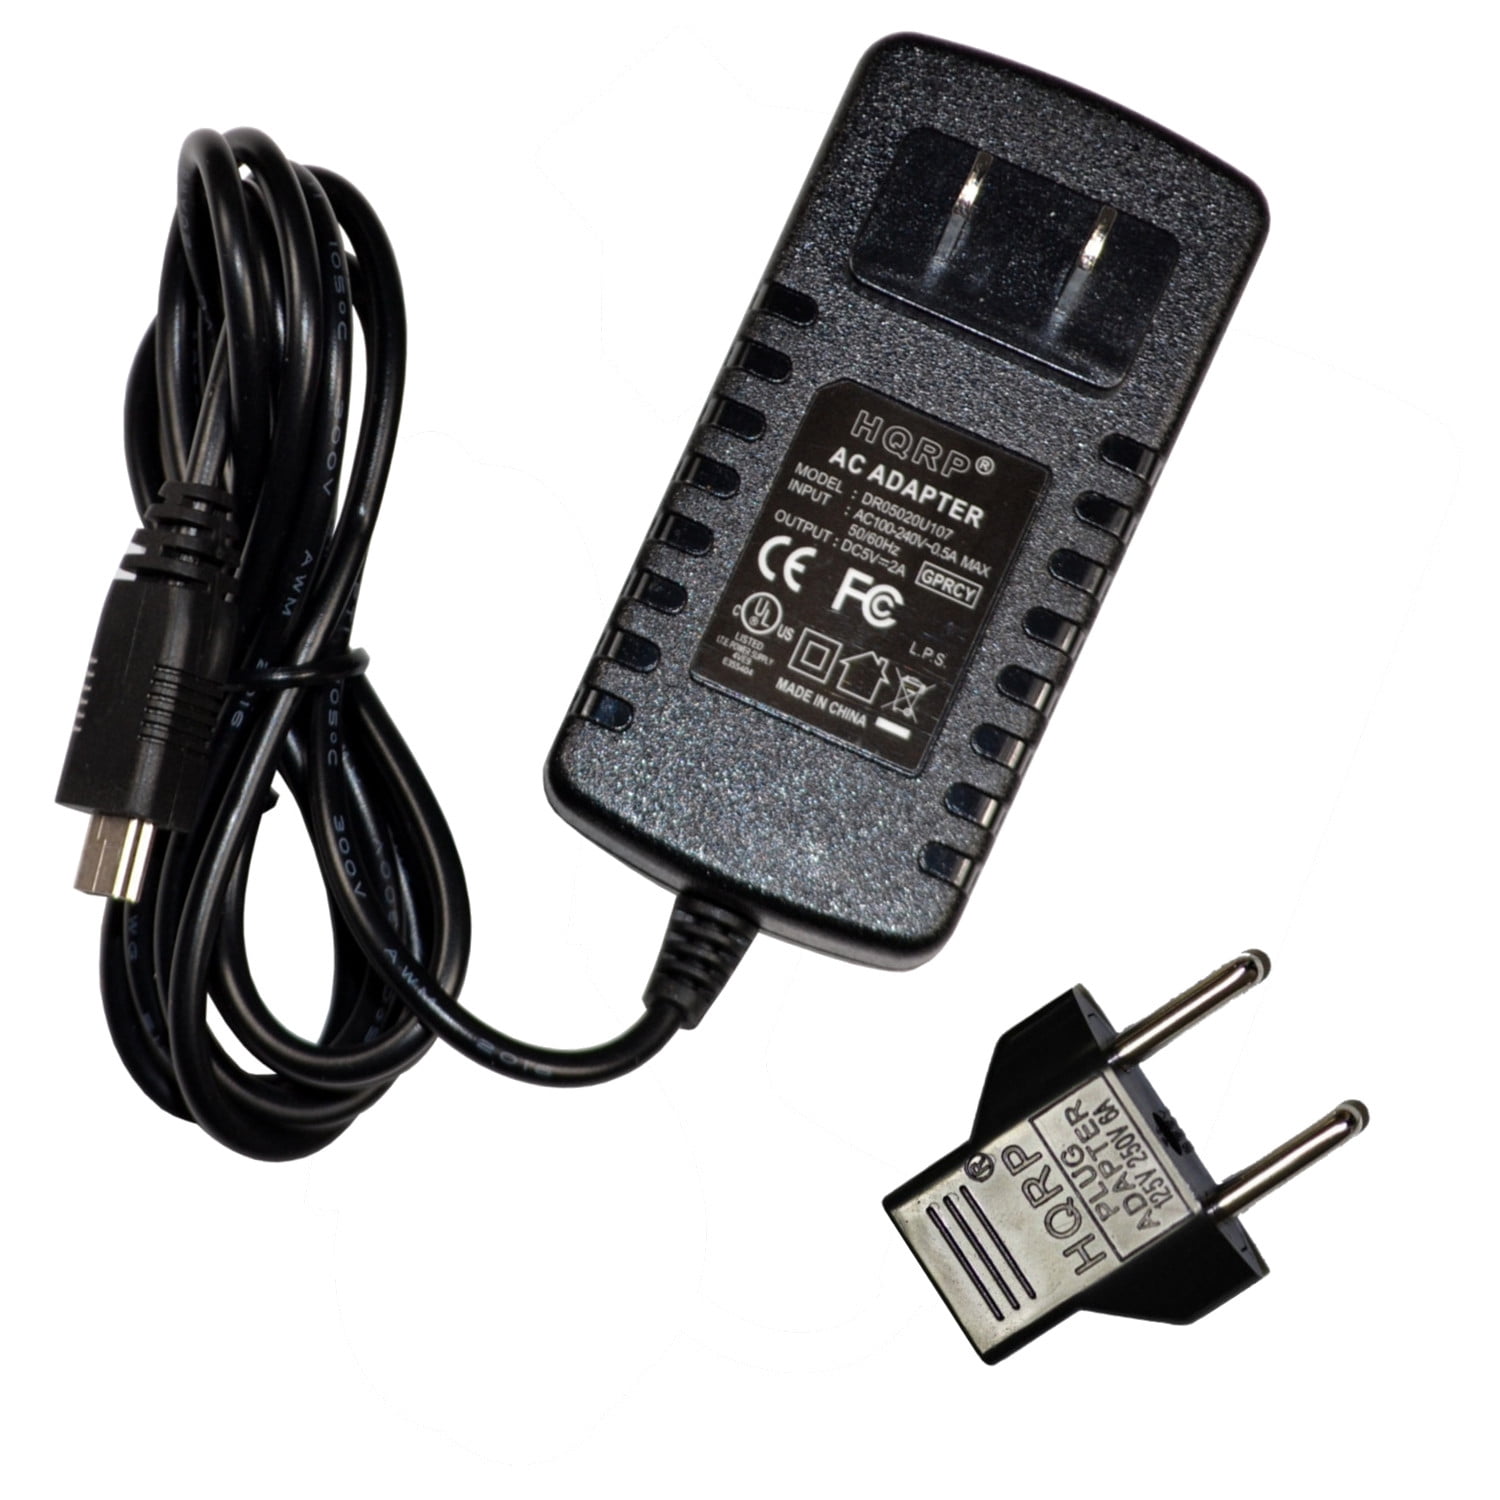 DC Car Power Charger Adapter USB Cord For LeapFrog LeapPad 2 Model 31400 Tablet